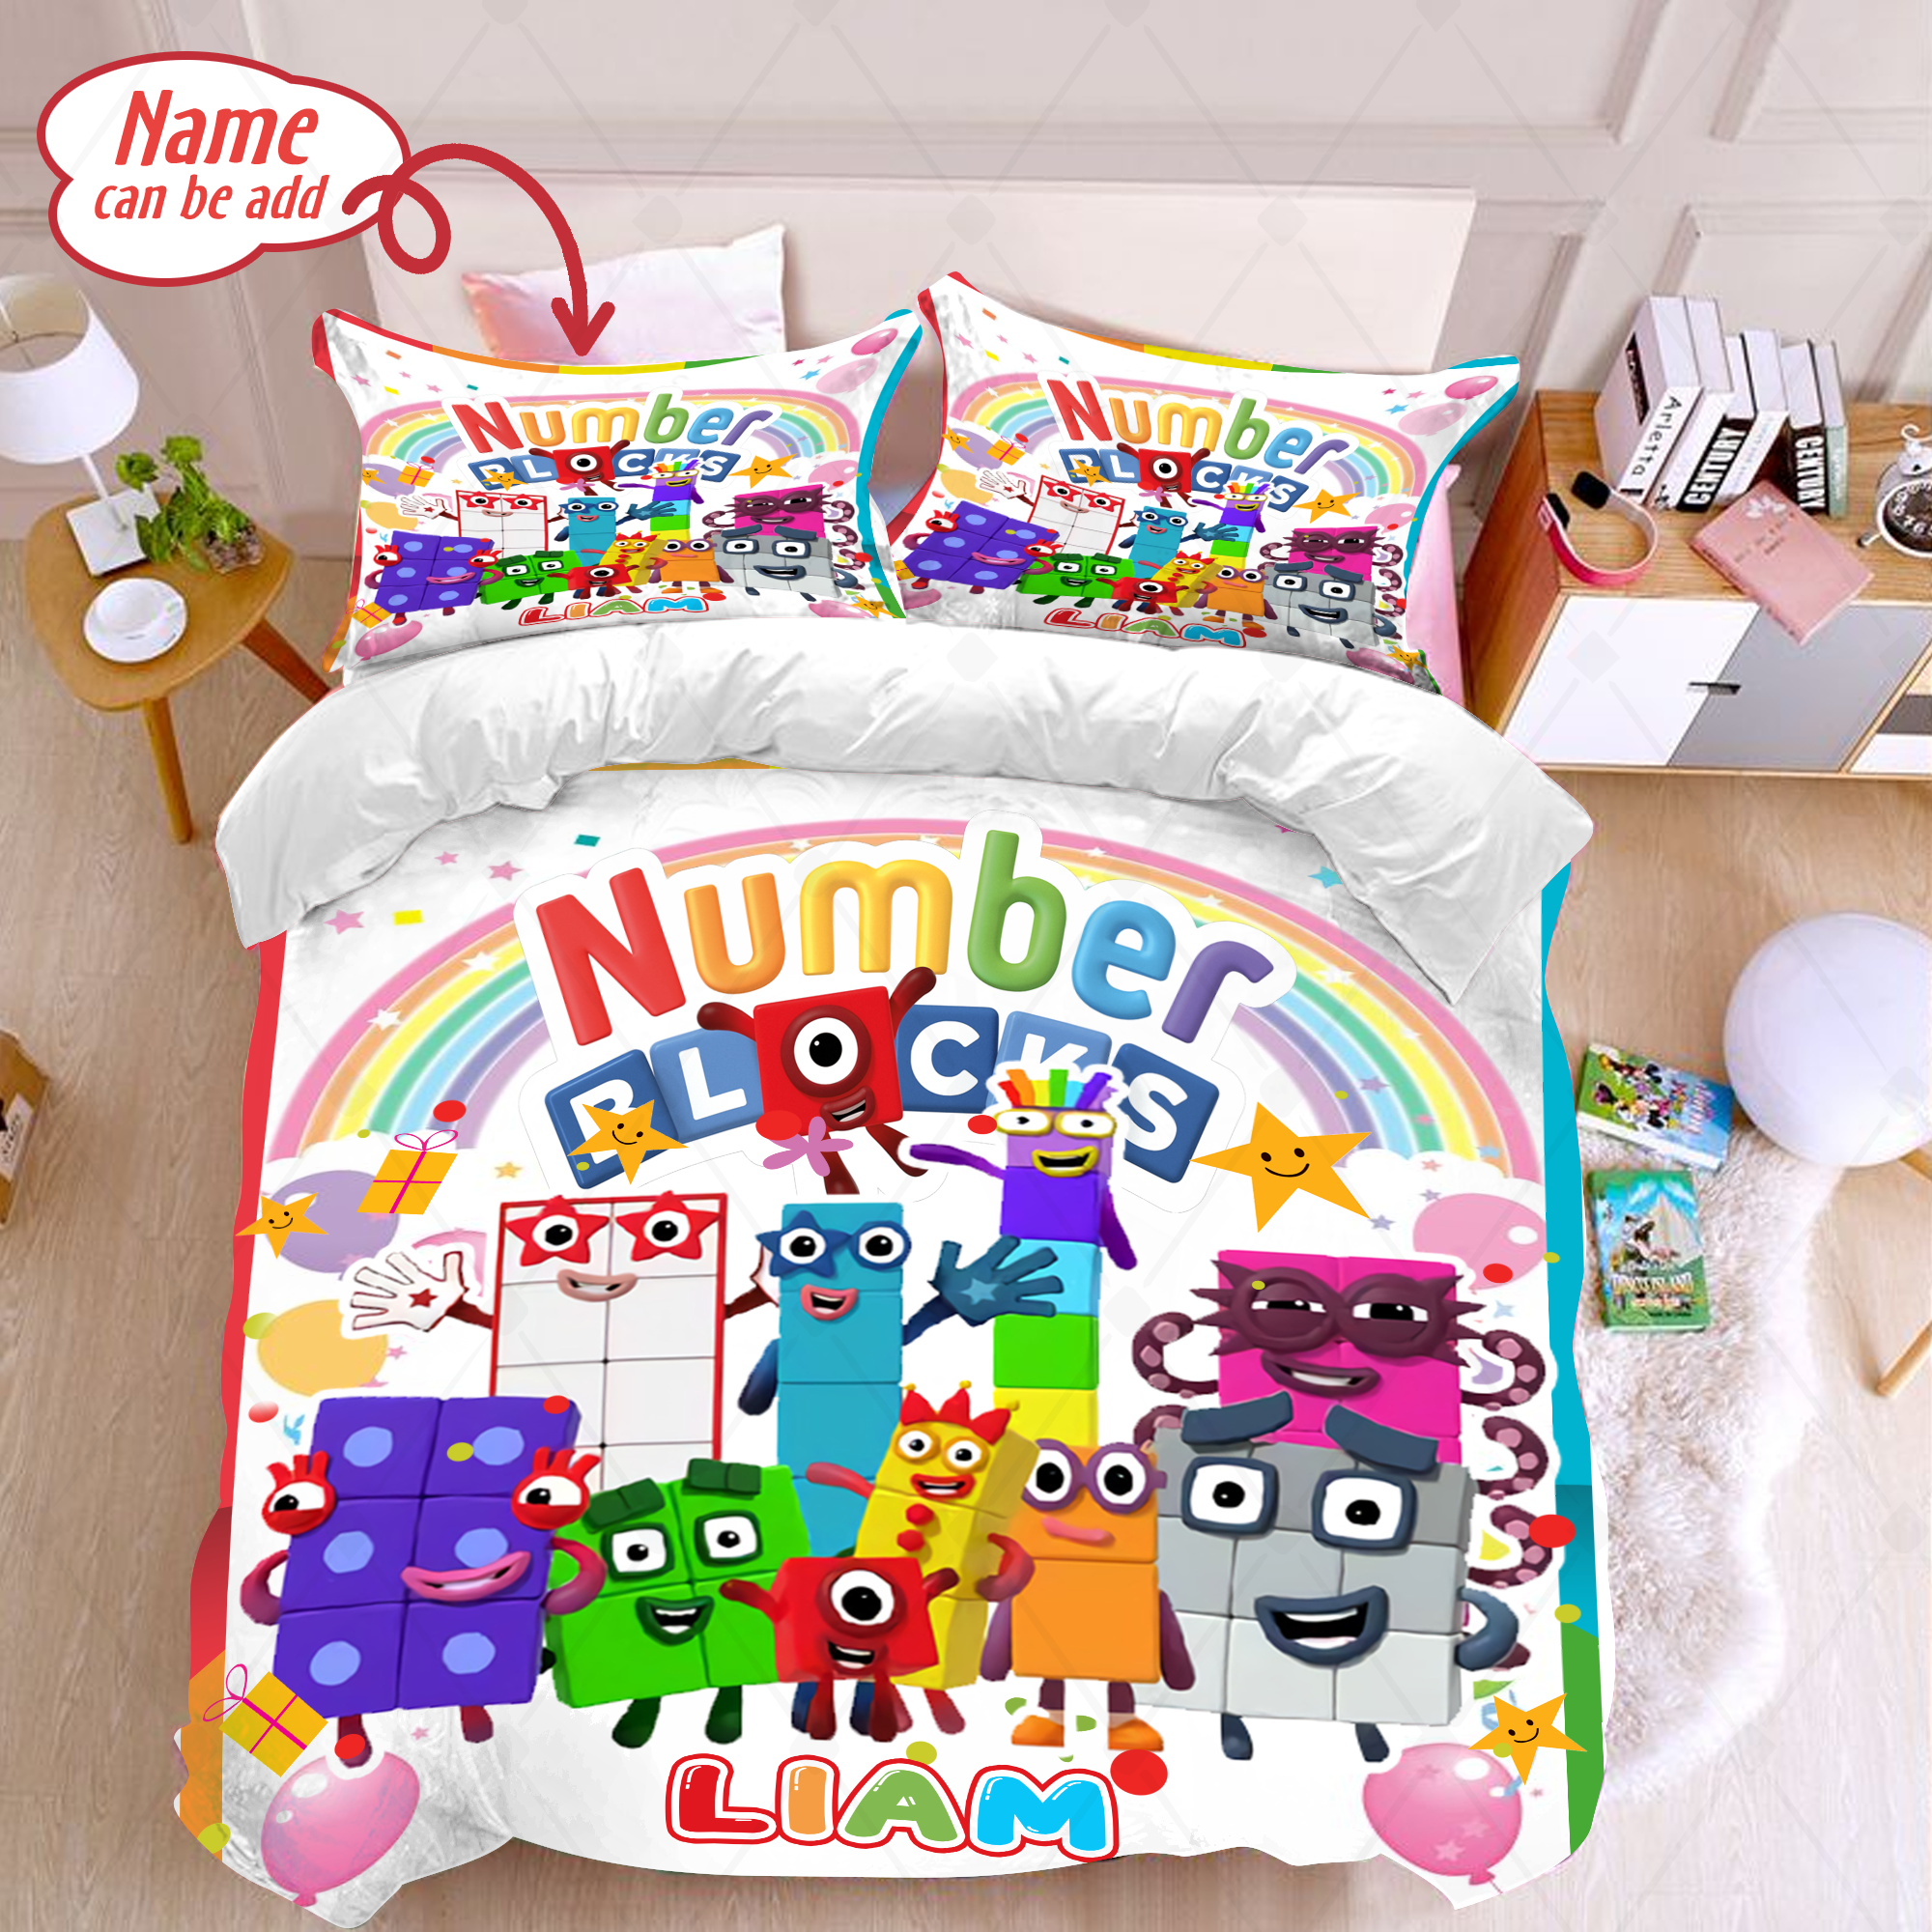 Personalized Numberblocks Duvet Cover And Pillowcase Numberblocks Bedding Set Numberblocks Birthday Party Theme